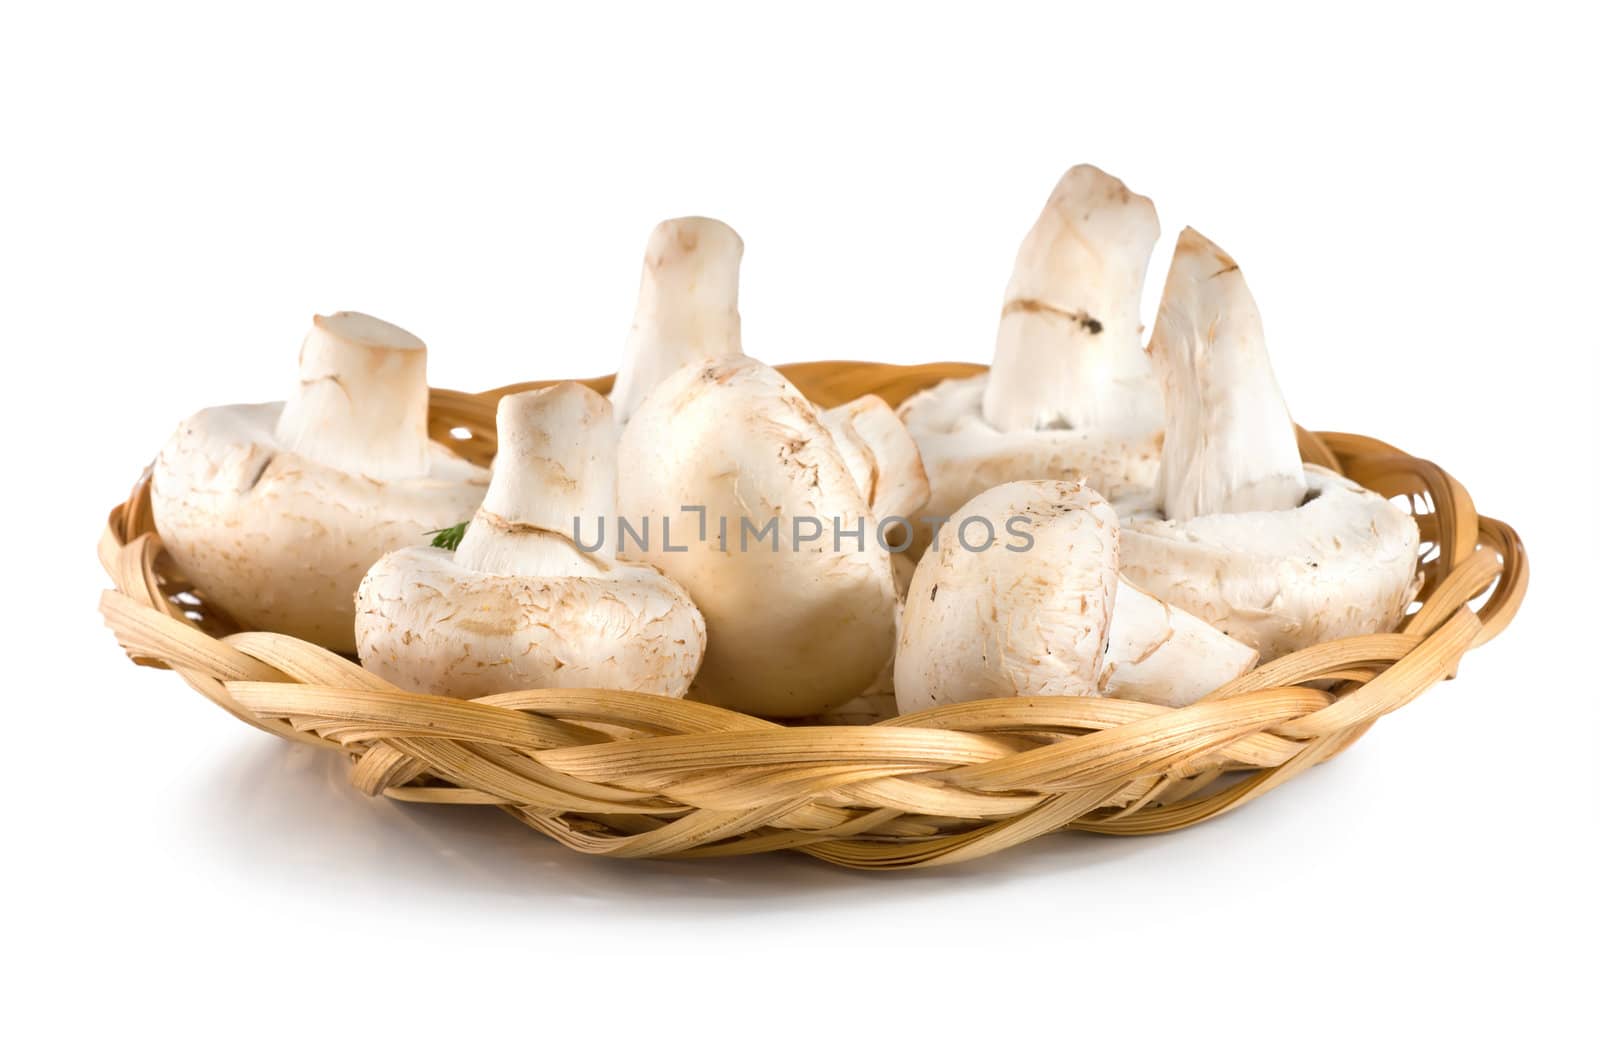 Basket with mushrooms by Givaga